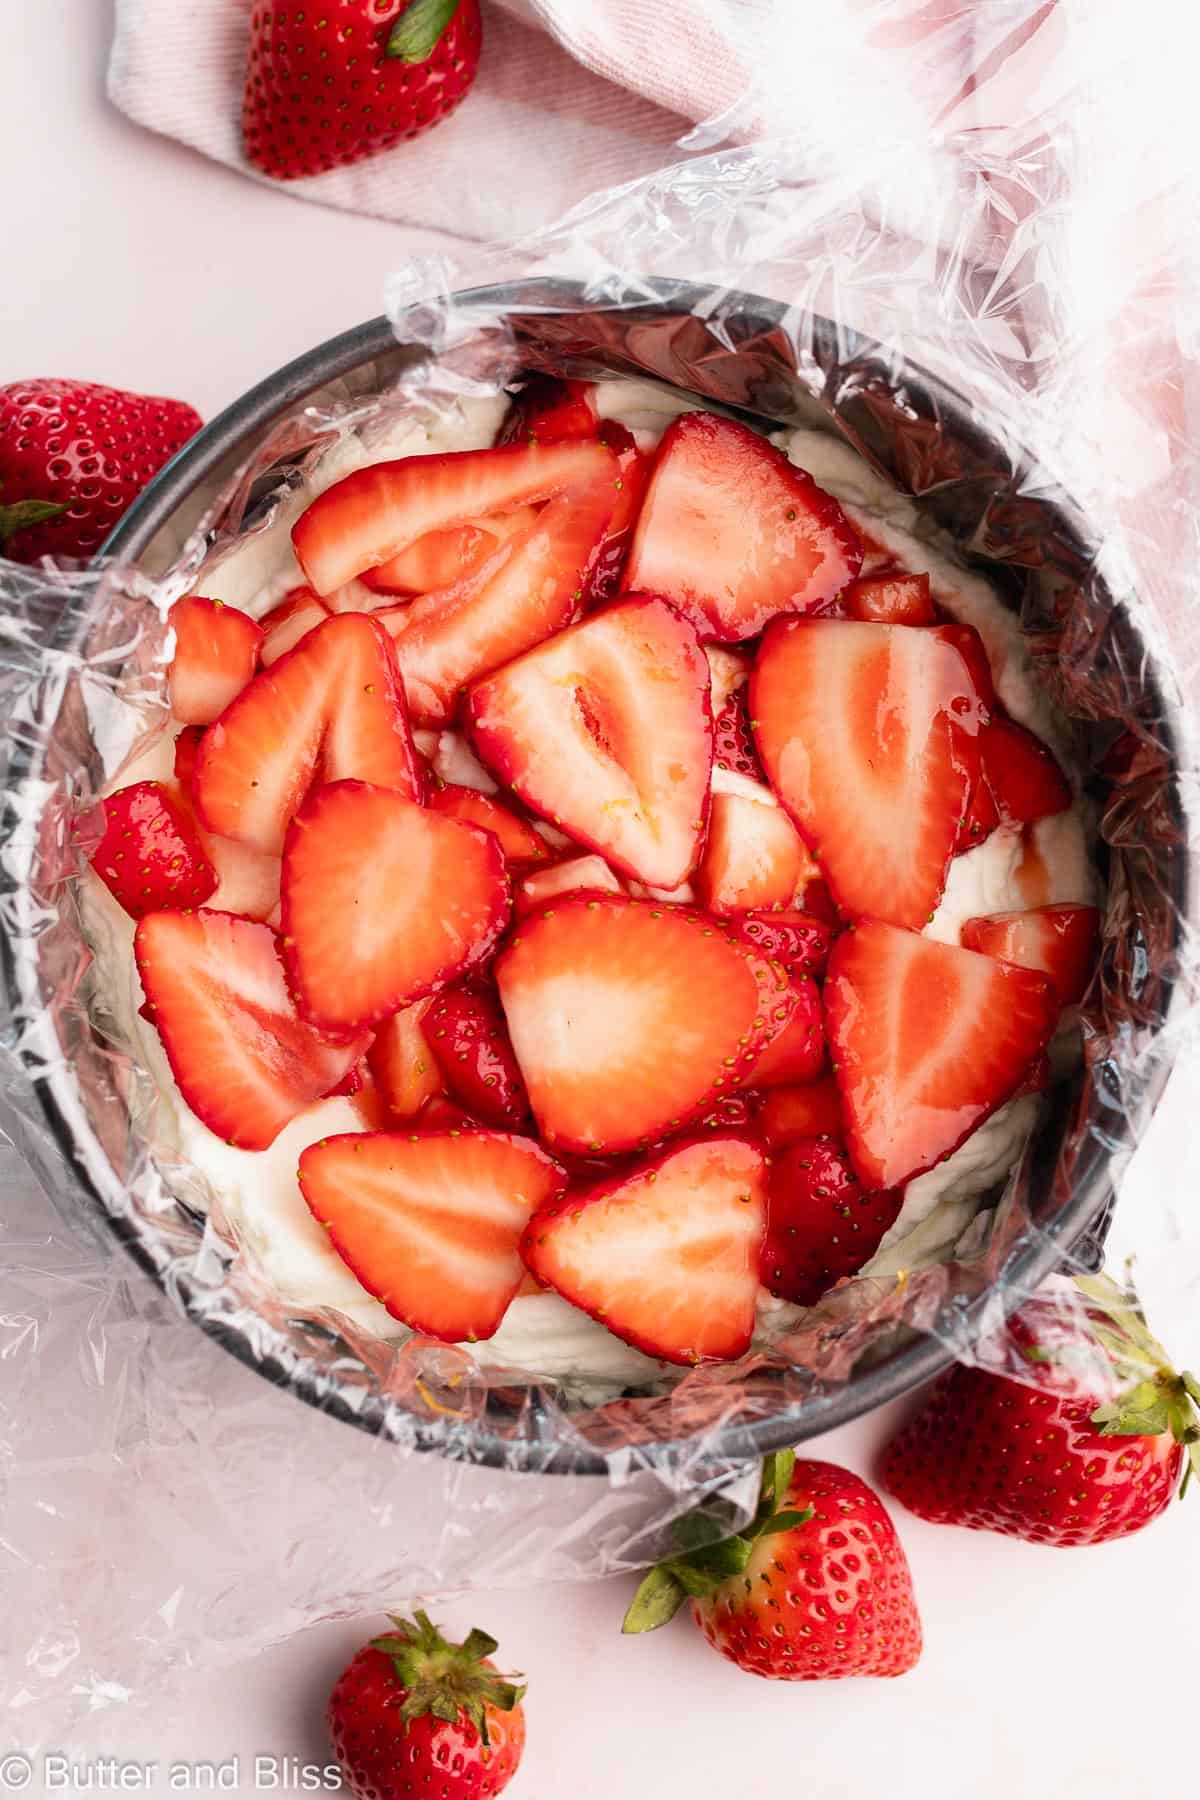 A small strawberry icebox cake being assembled in a springform pan.